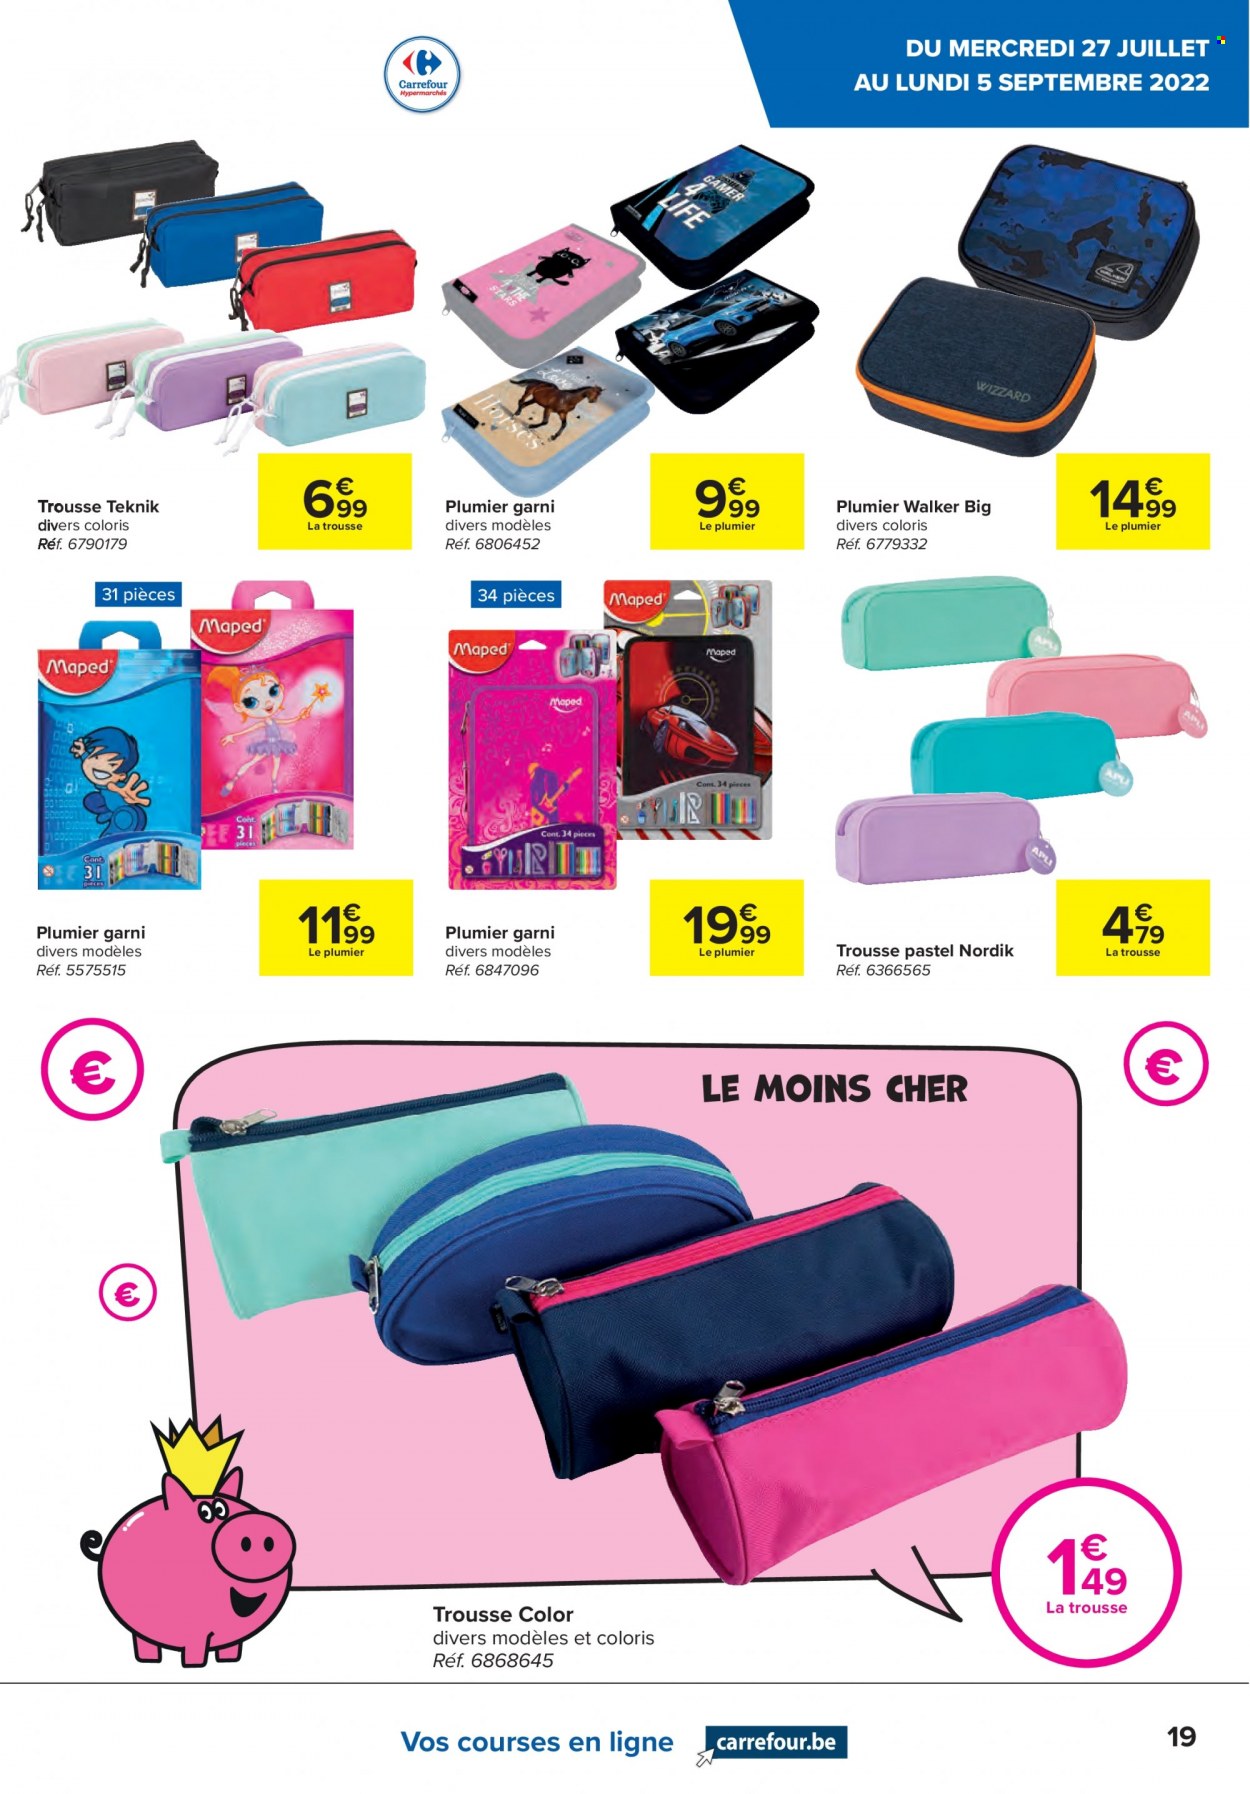 Catalogue Carrefour hypermarkt - 27.7.2022 - 5.9.2022. Page 19.